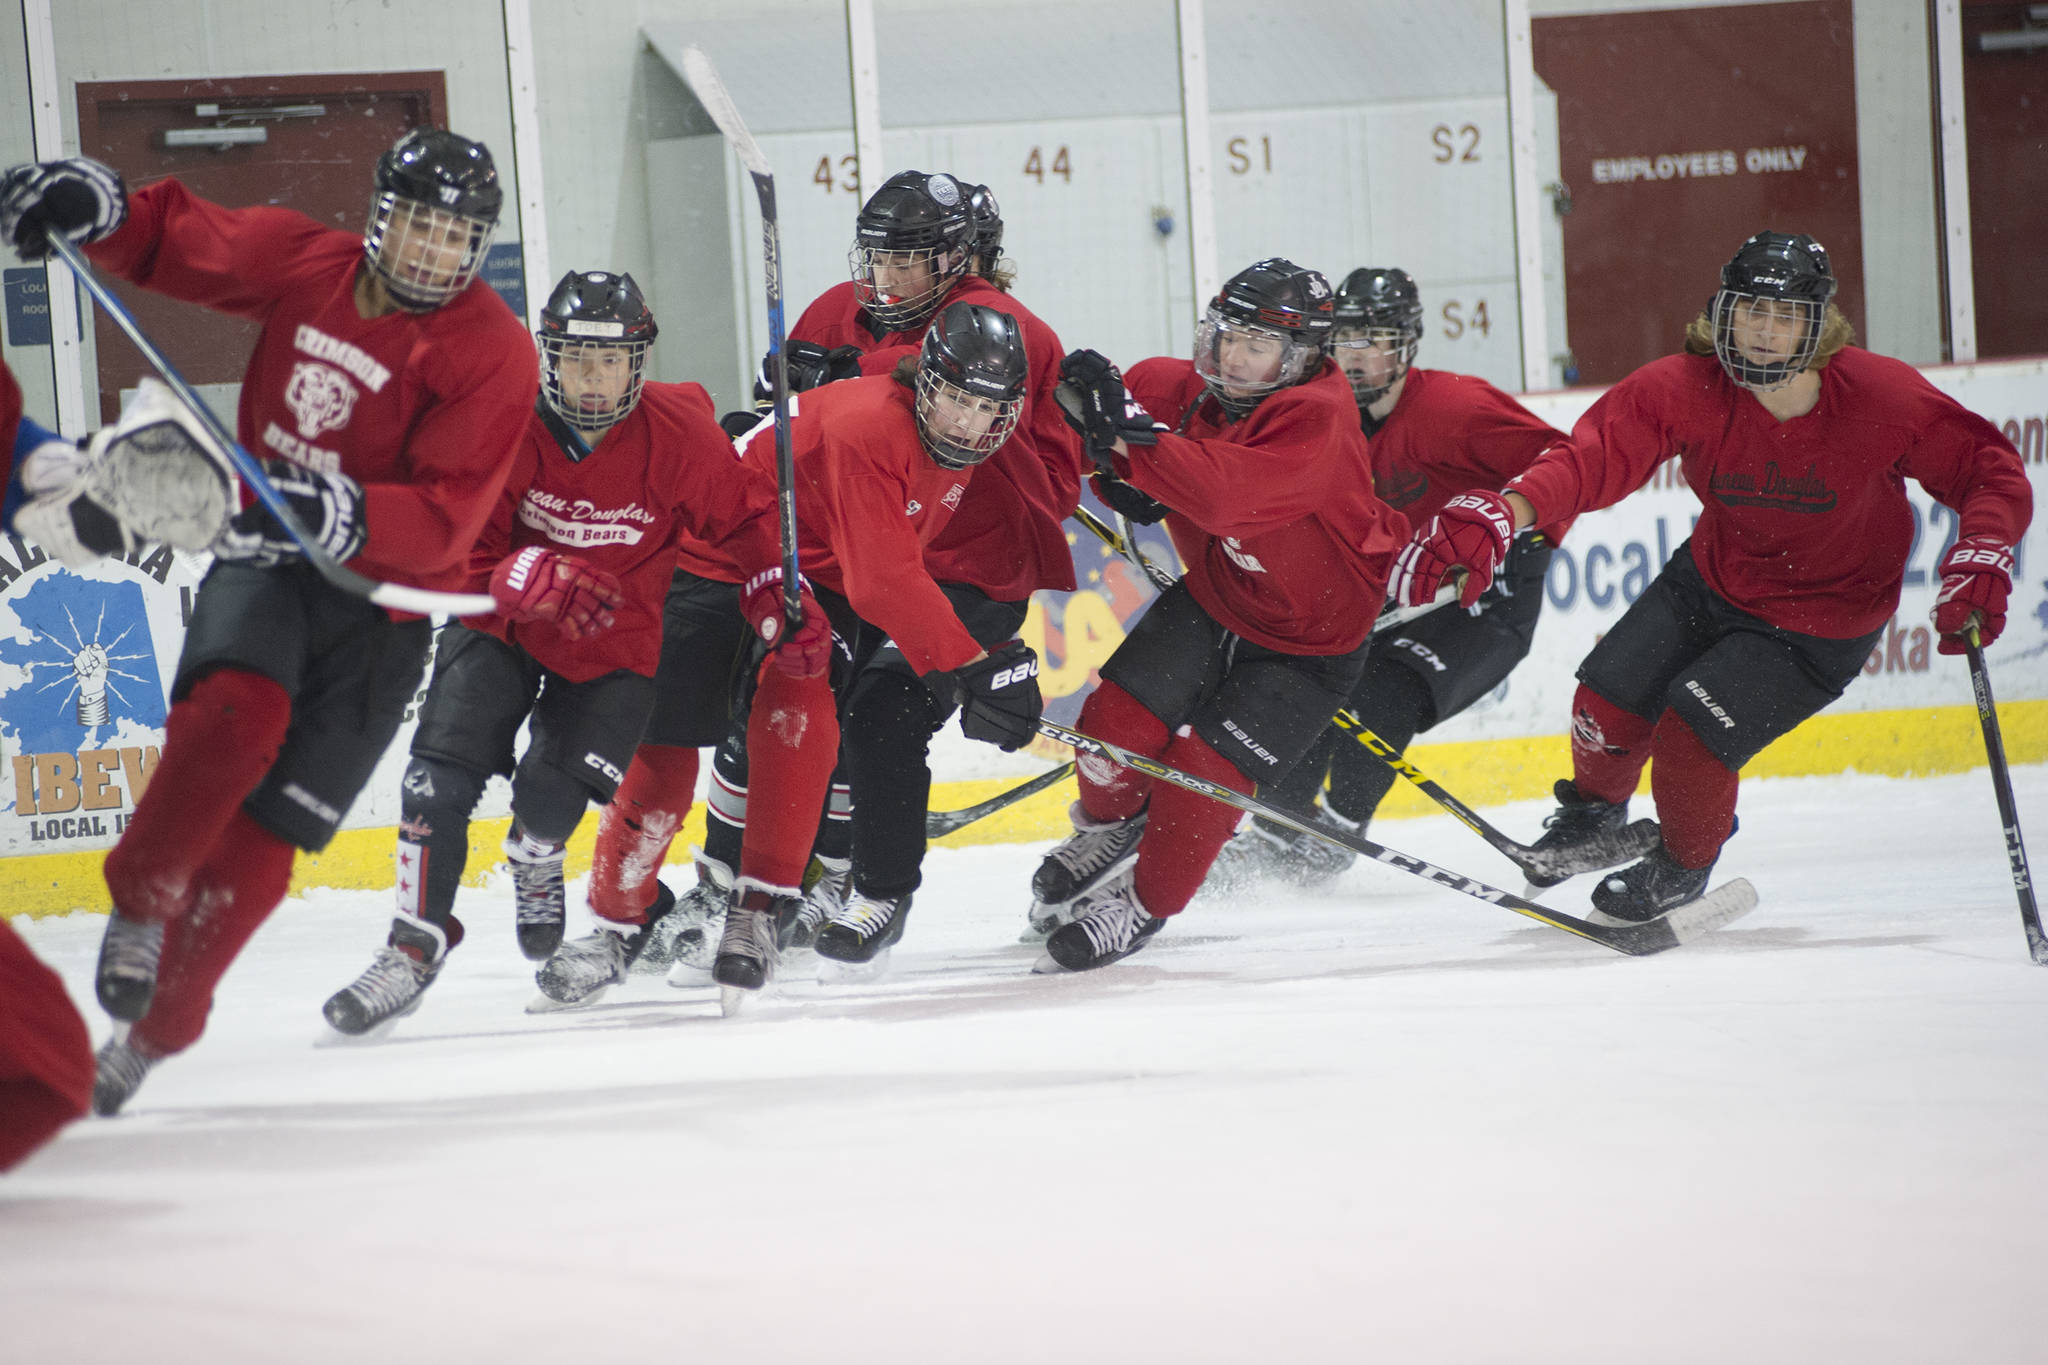 Juneau-Douglas High School teammates skate at top speed at the end of practice on Wednesday morning at Treadwell Arena. Wednesday was the first practice of the season. (Nolin Ainsworth | Juneau Empire)